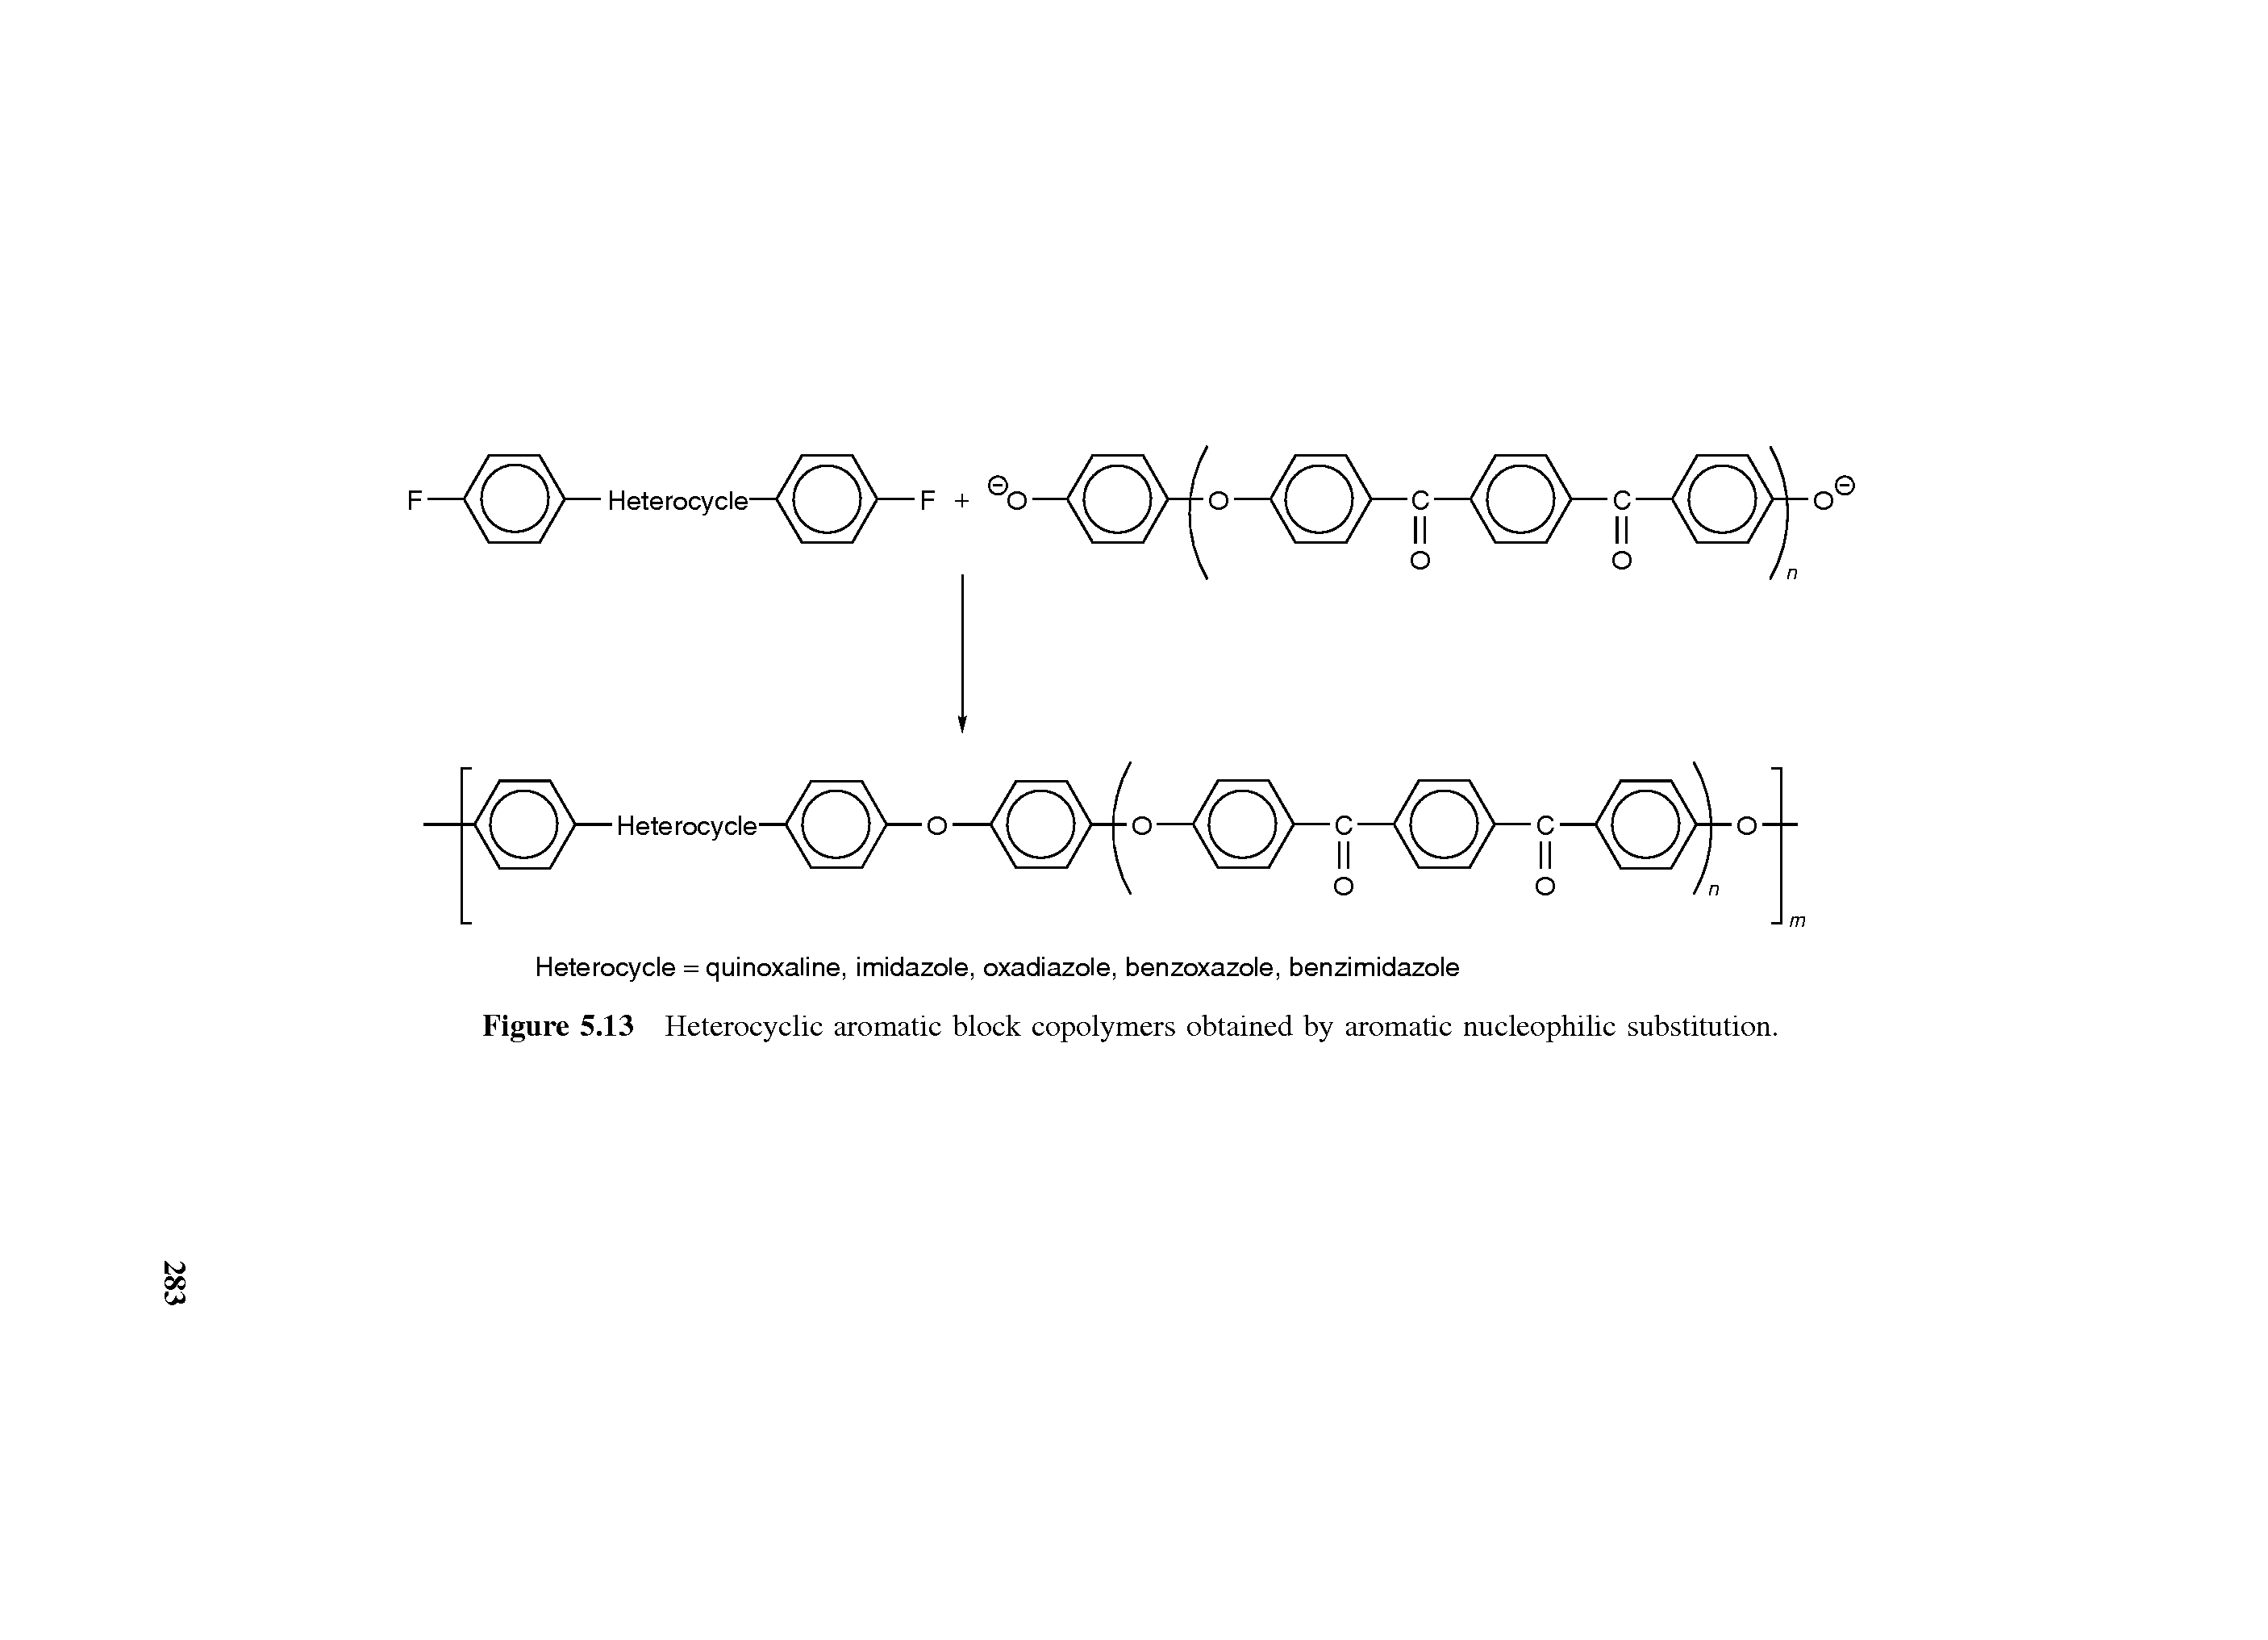 Figure 5.13 Heterocyclic aromatic block copolymers obtained by aromatic nucleophilic substitution.